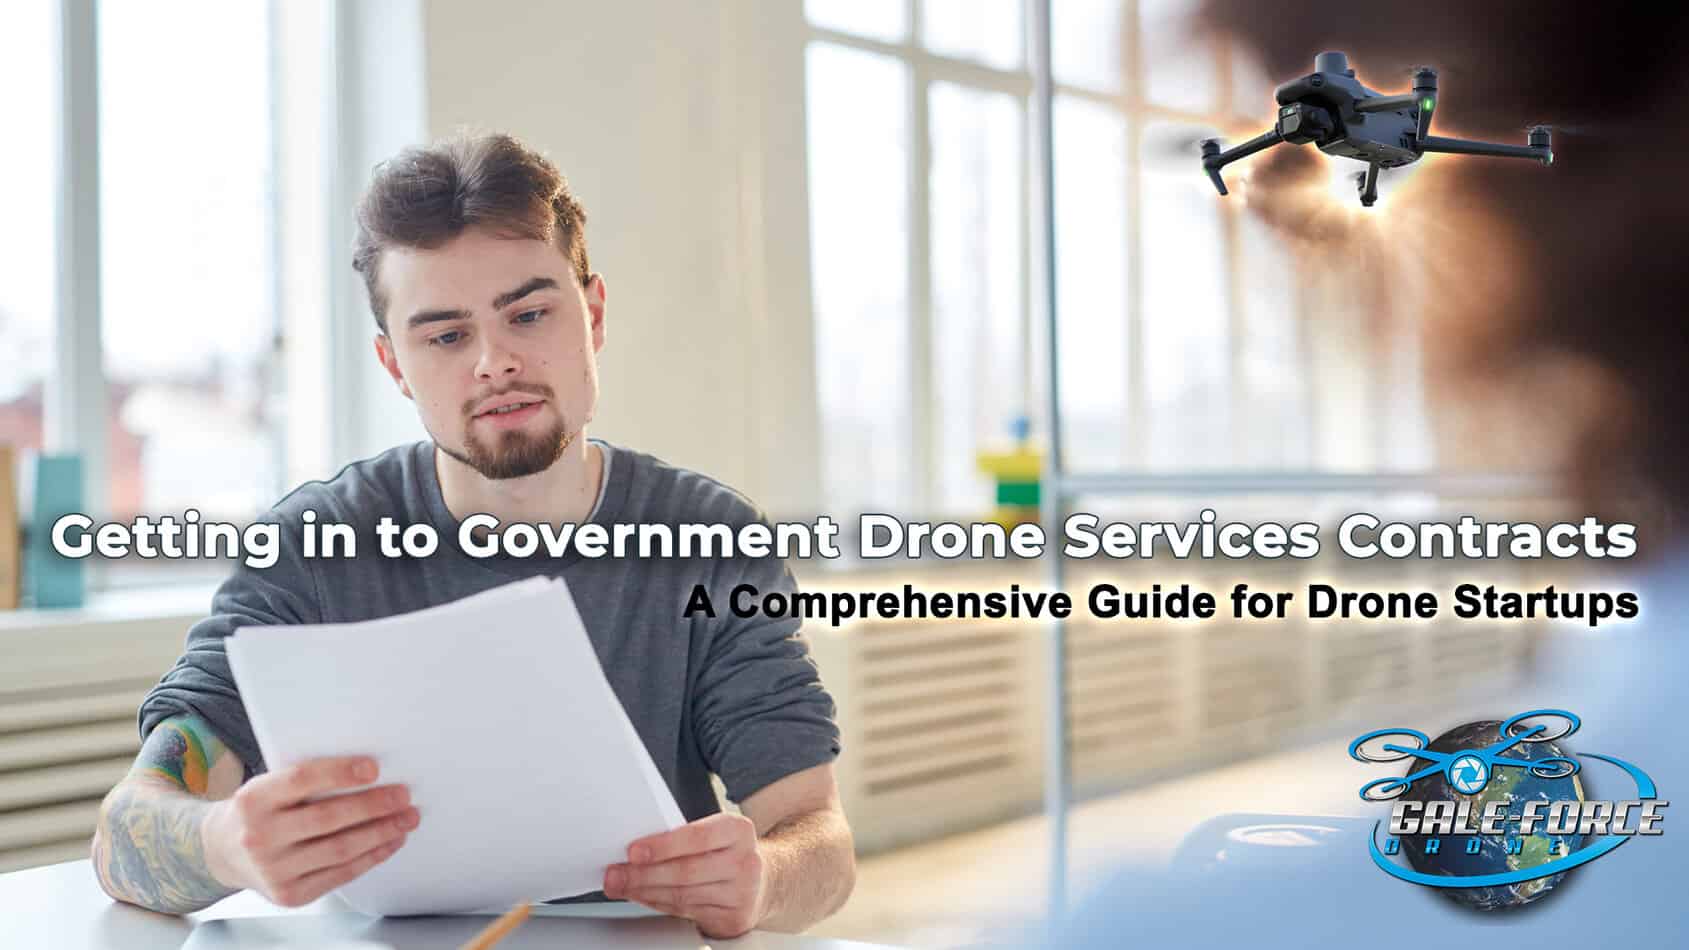 How to get Government Drone Service Business: A Guide for Drone Startups